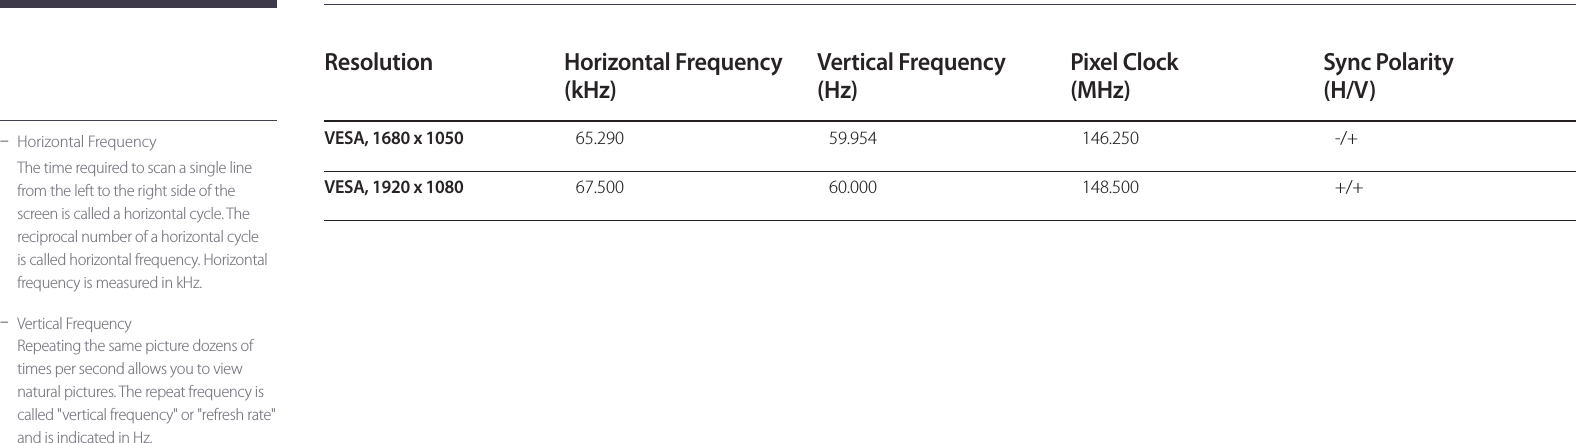 75Resolution Horizontal Frequency (kHz)Vertical Frequency (Hz)Pixel Clock (MHz)Sync Polarity (H/V)VESA, 1680 x 105065.290  59.954  146.250  -/+VESA, 1920 x 108067.500 60.000 148.500 +/+ -Horizontal FrequencyThe time required to scan a single line from the left to the right side of the screen is called a horizontal cycle. The reciprocal number of a horizontal cycle is called horizontal frequency. Horizontal frequency is measured in kHz. -Vertical FrequencyRepeating the same picture dozens of times per second allows you to view natural pictures. The repeat frequency is called &quot;vertical frequency&quot; or &quot;refresh rate&quot; and is indicated in Hz.